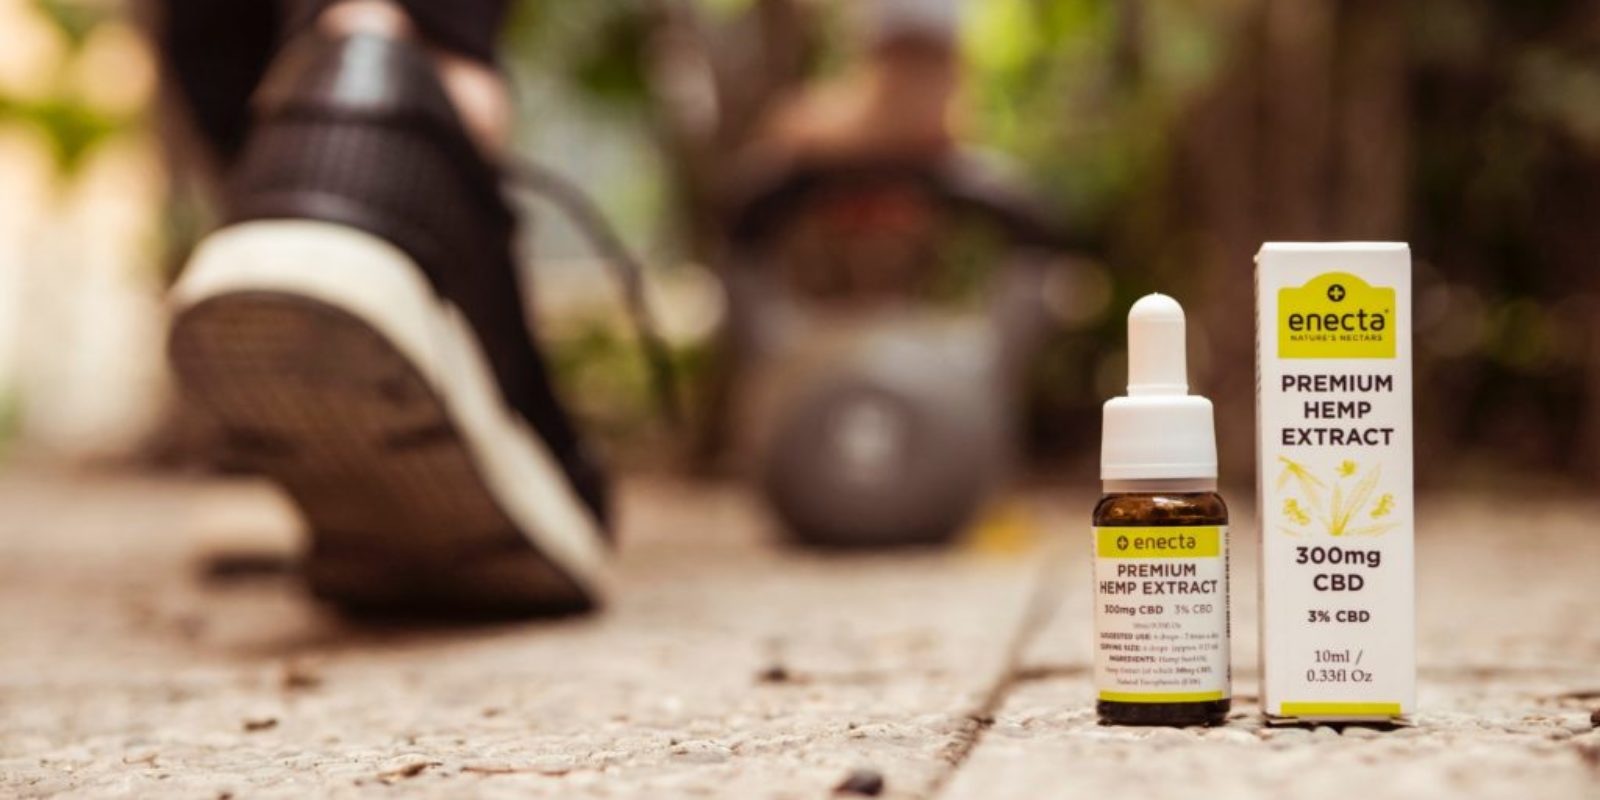 CBD toxicity is found in some products